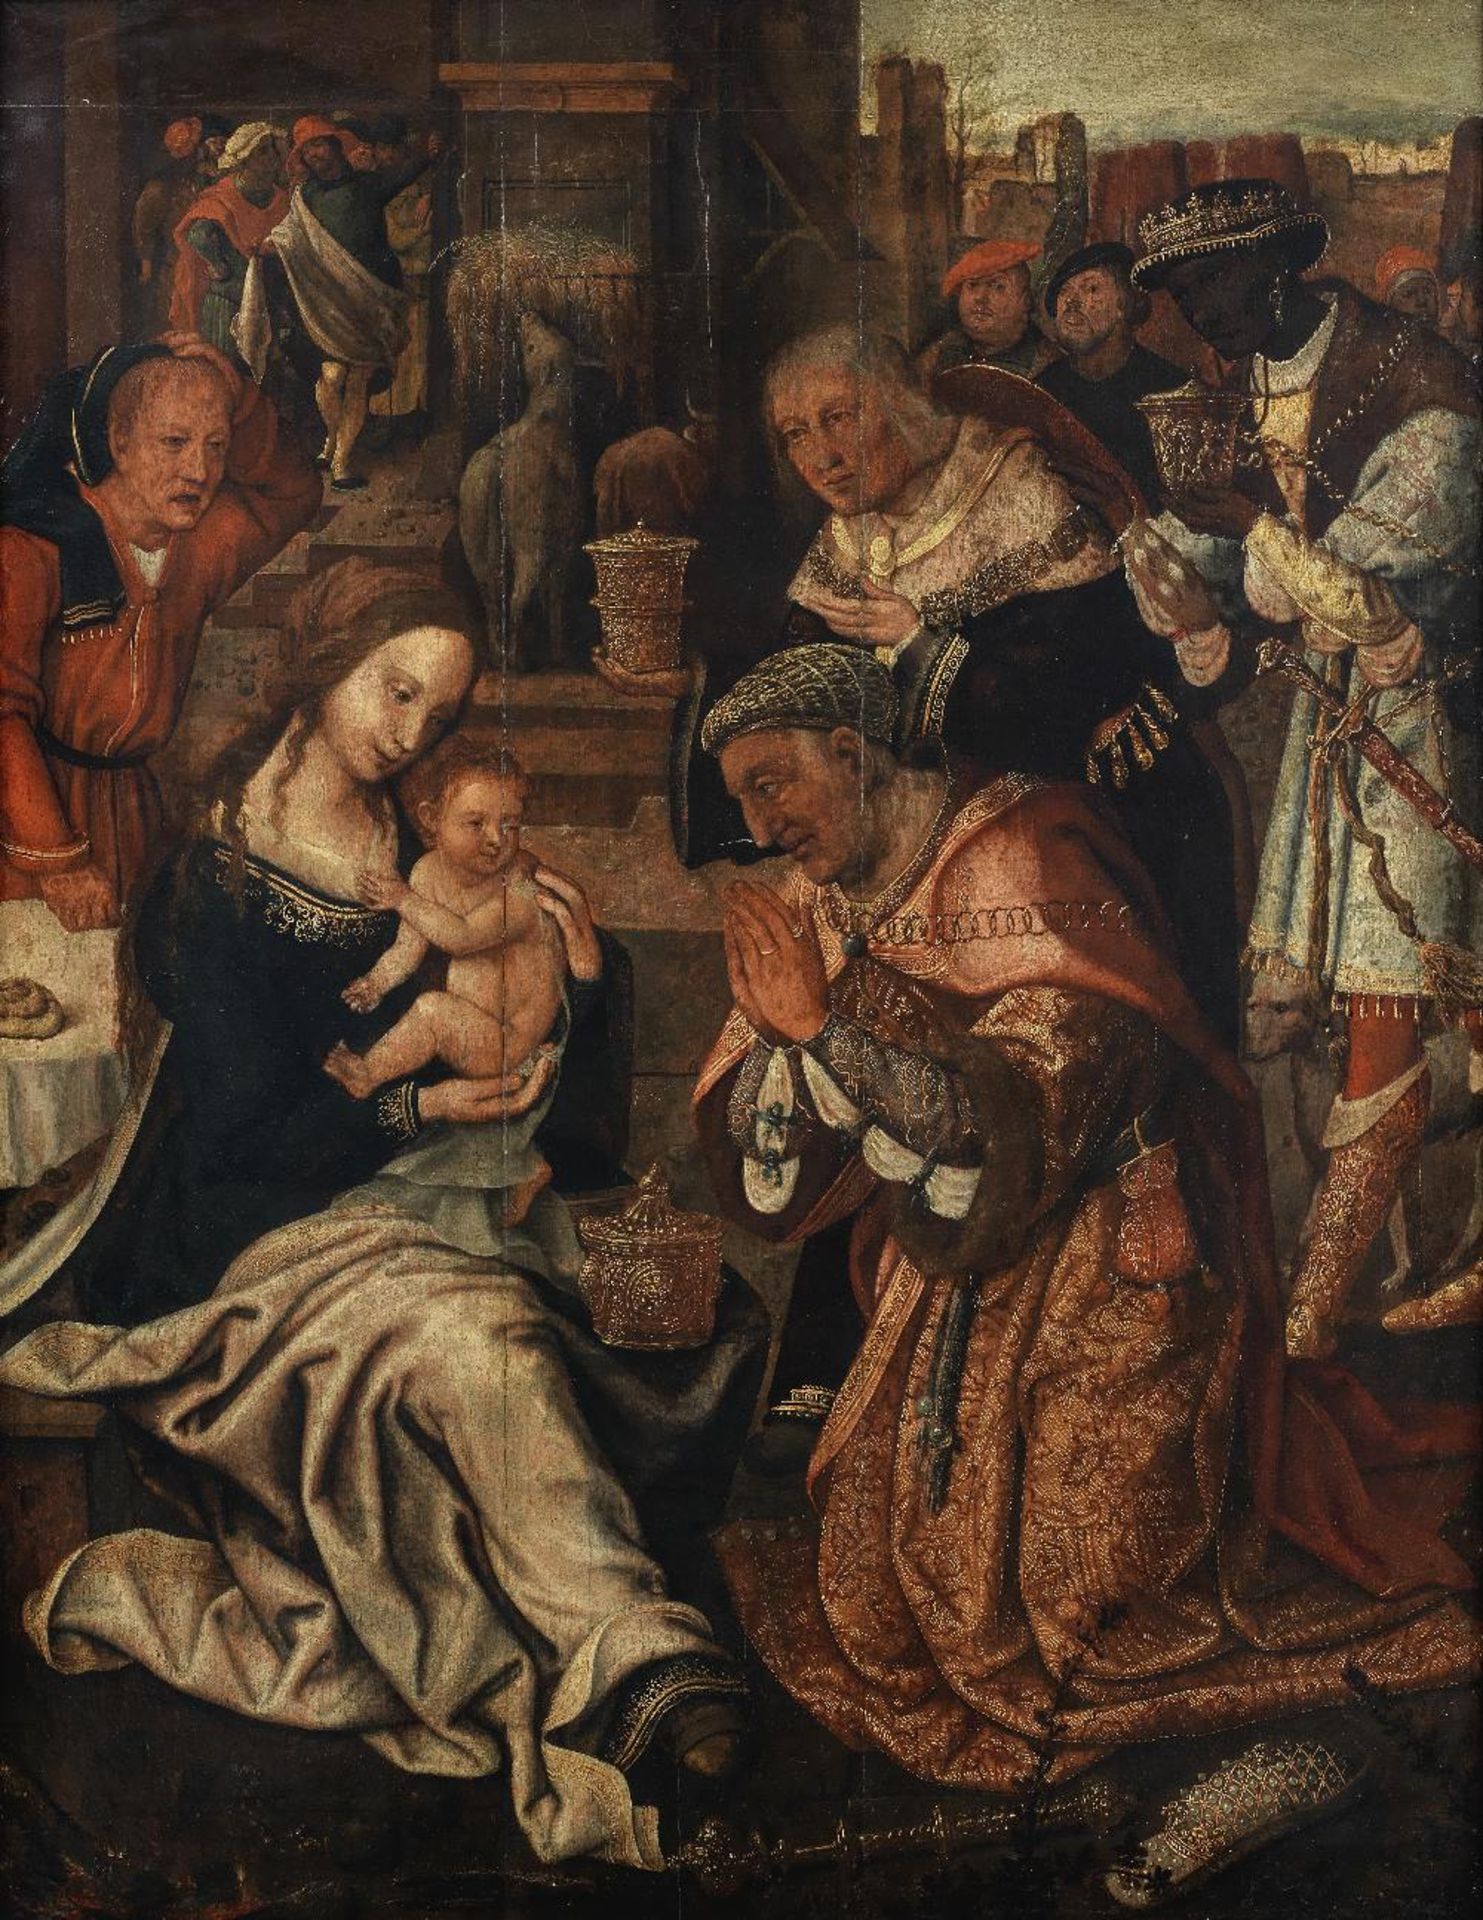 Follower of Pieter Coecke van Aelst (Aelst 1502-1550 Brussels) The Adoration of the Magi